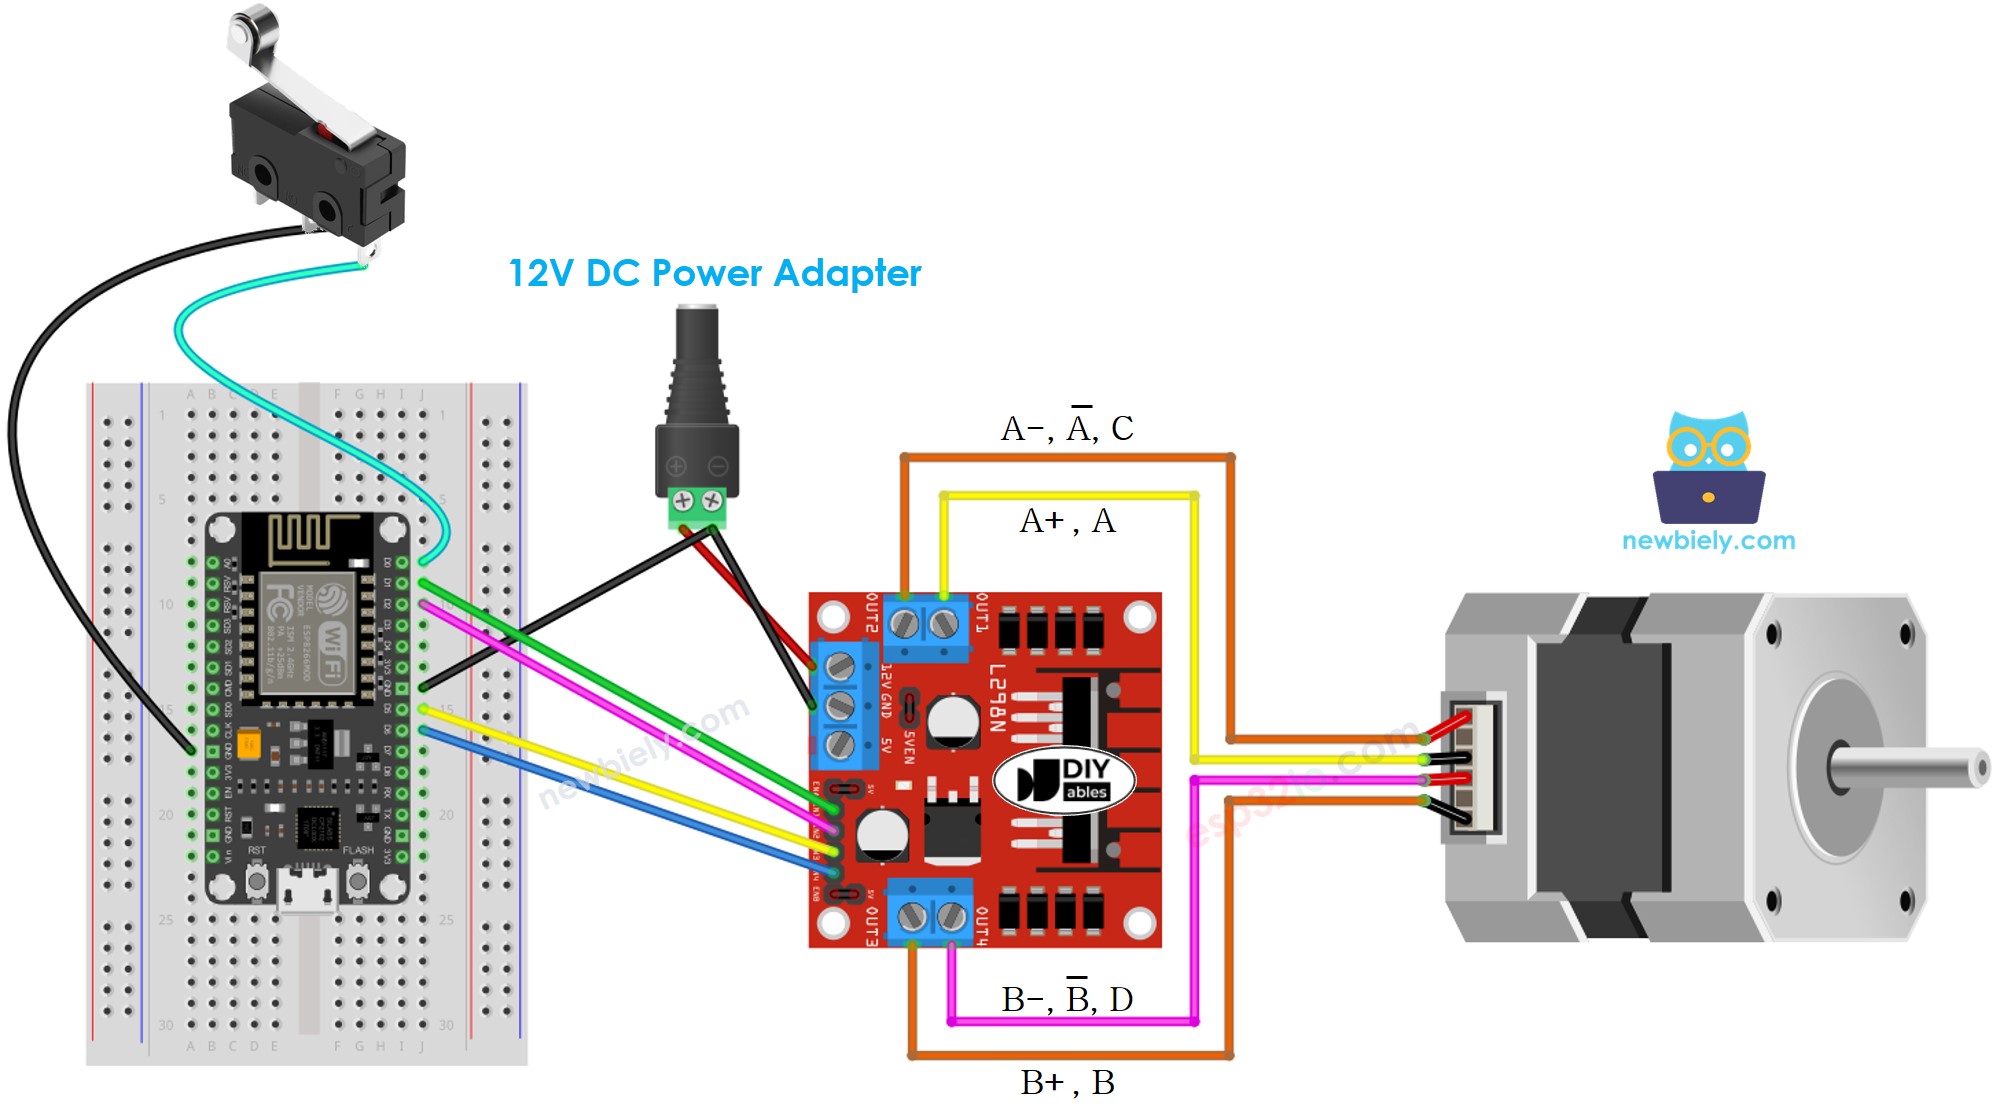 The wiring diagram between ESP8266 NodeMCU and stepper motor and limit switch